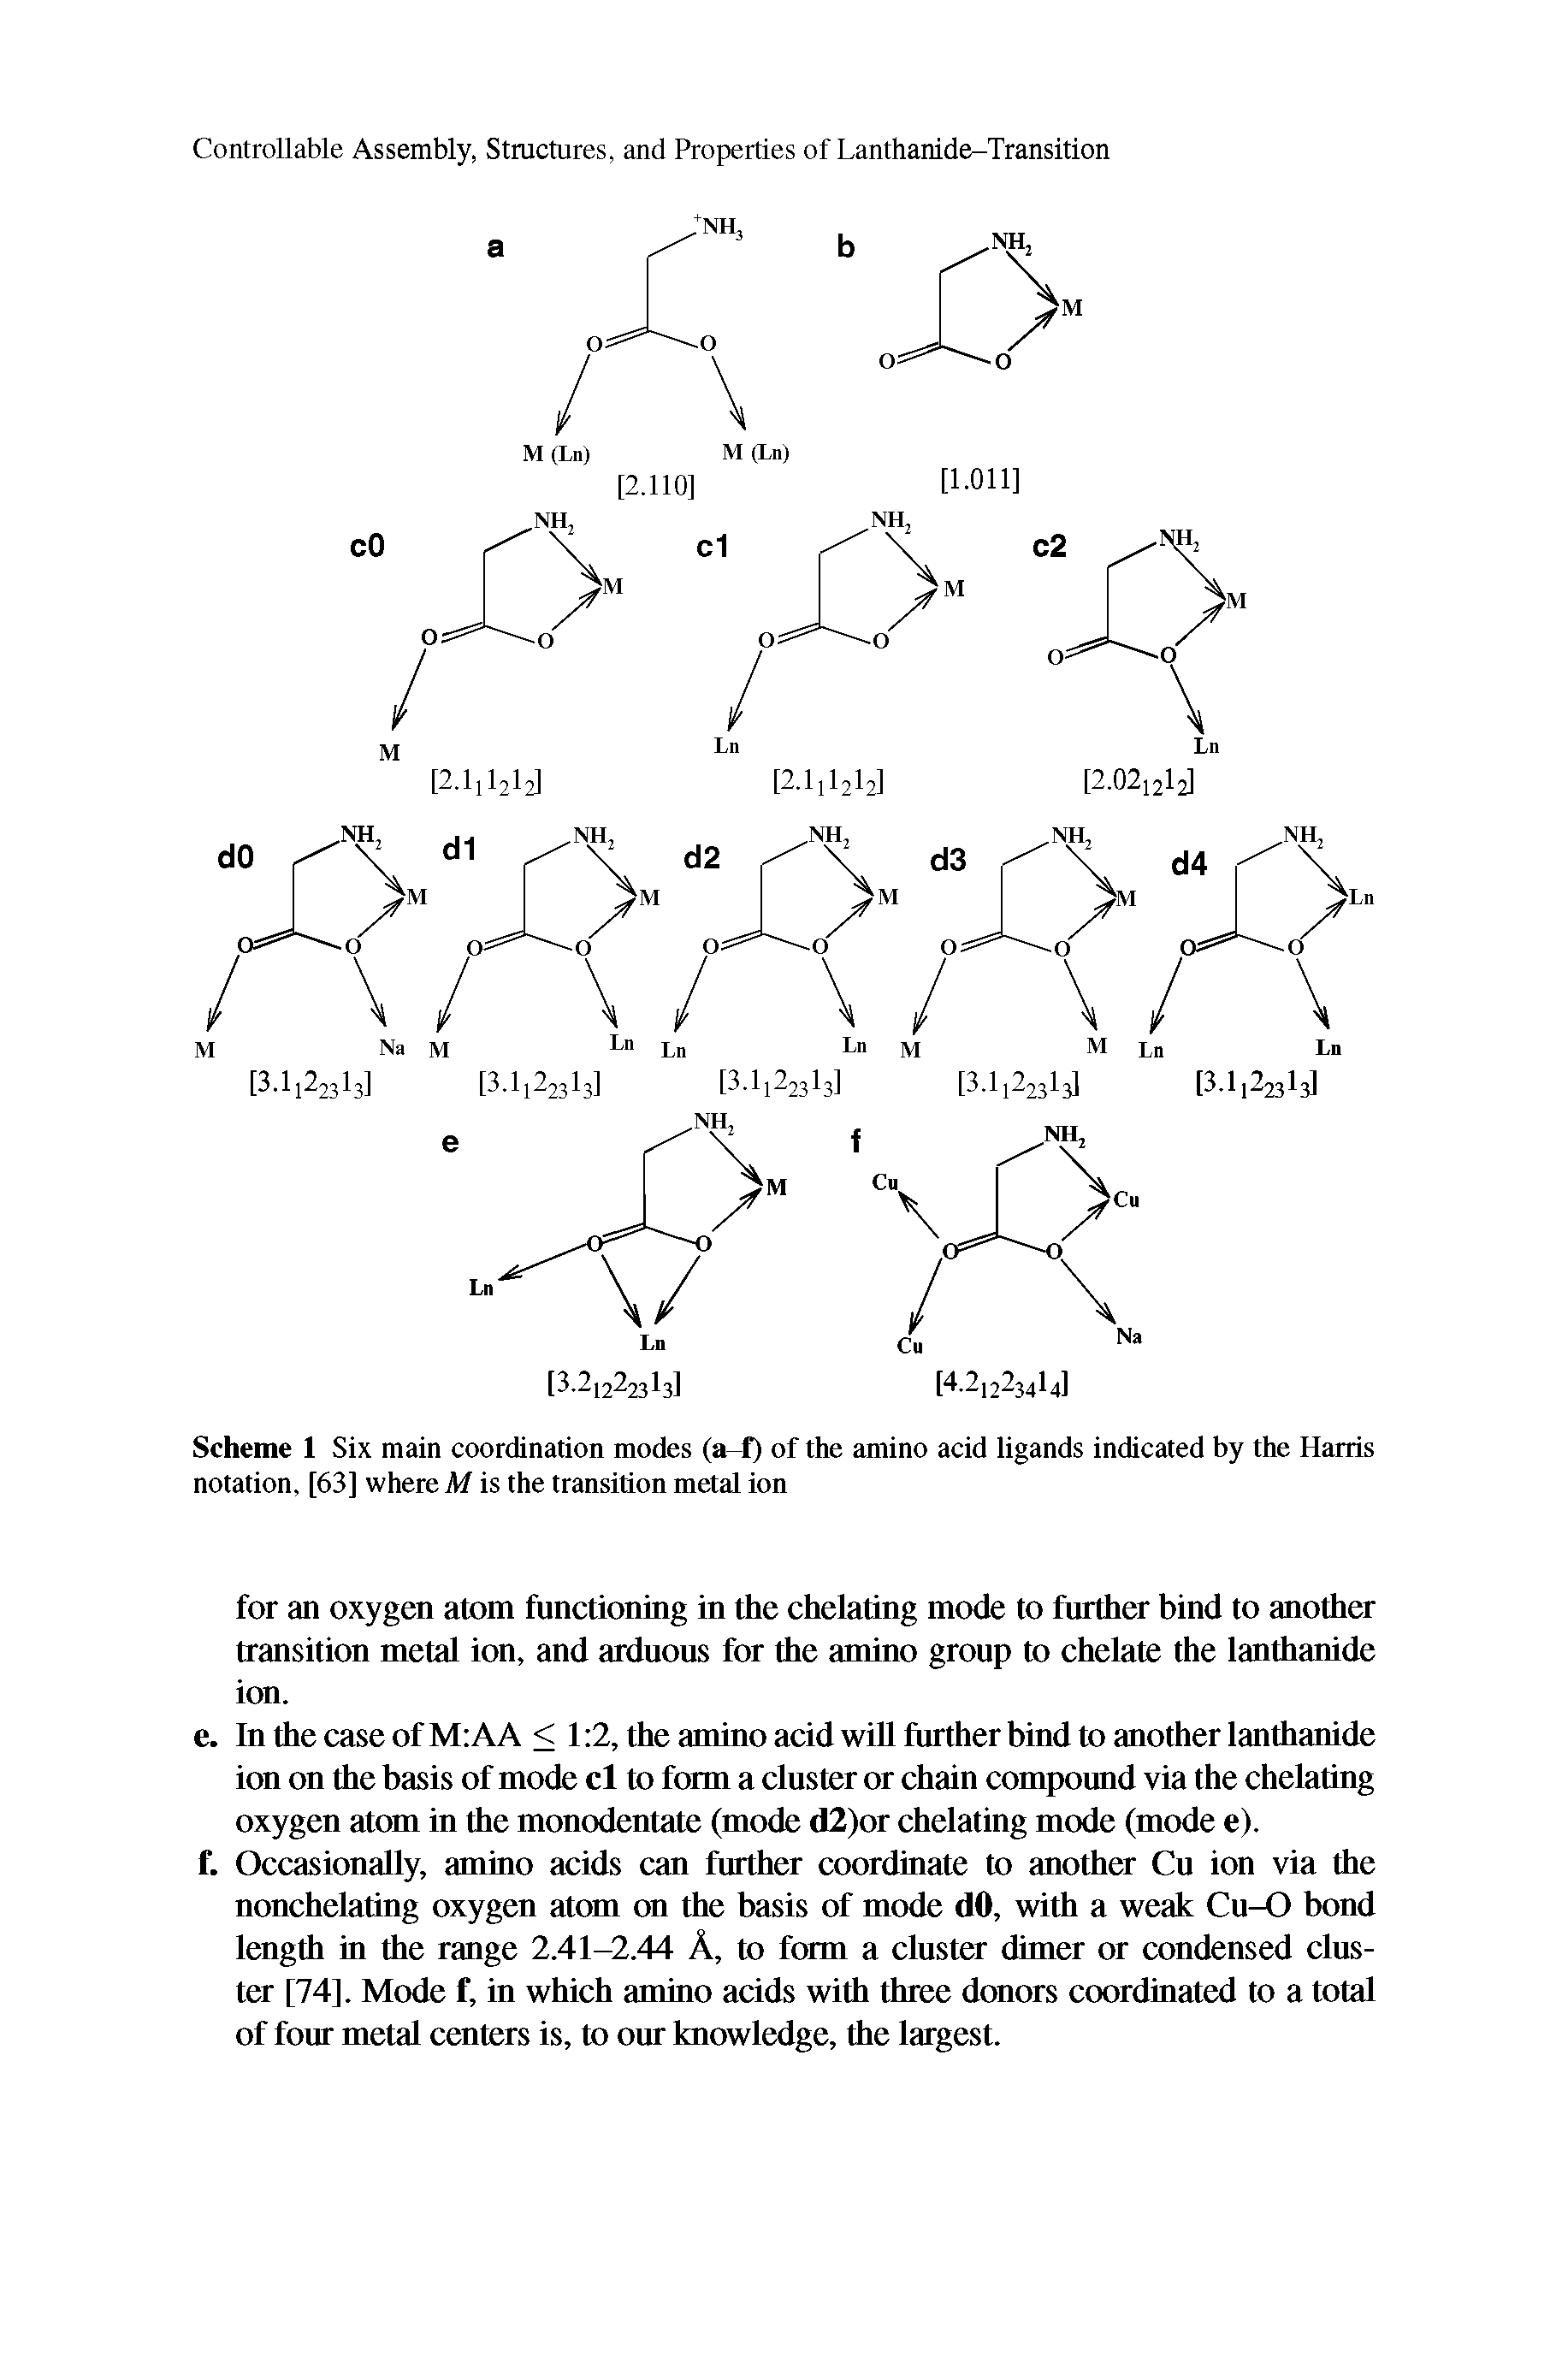 Scheme 1 Six main coordination modes (a-f) of the amino acid ligands indicated by the Harris notation, [63] where M is the transition metal ion...